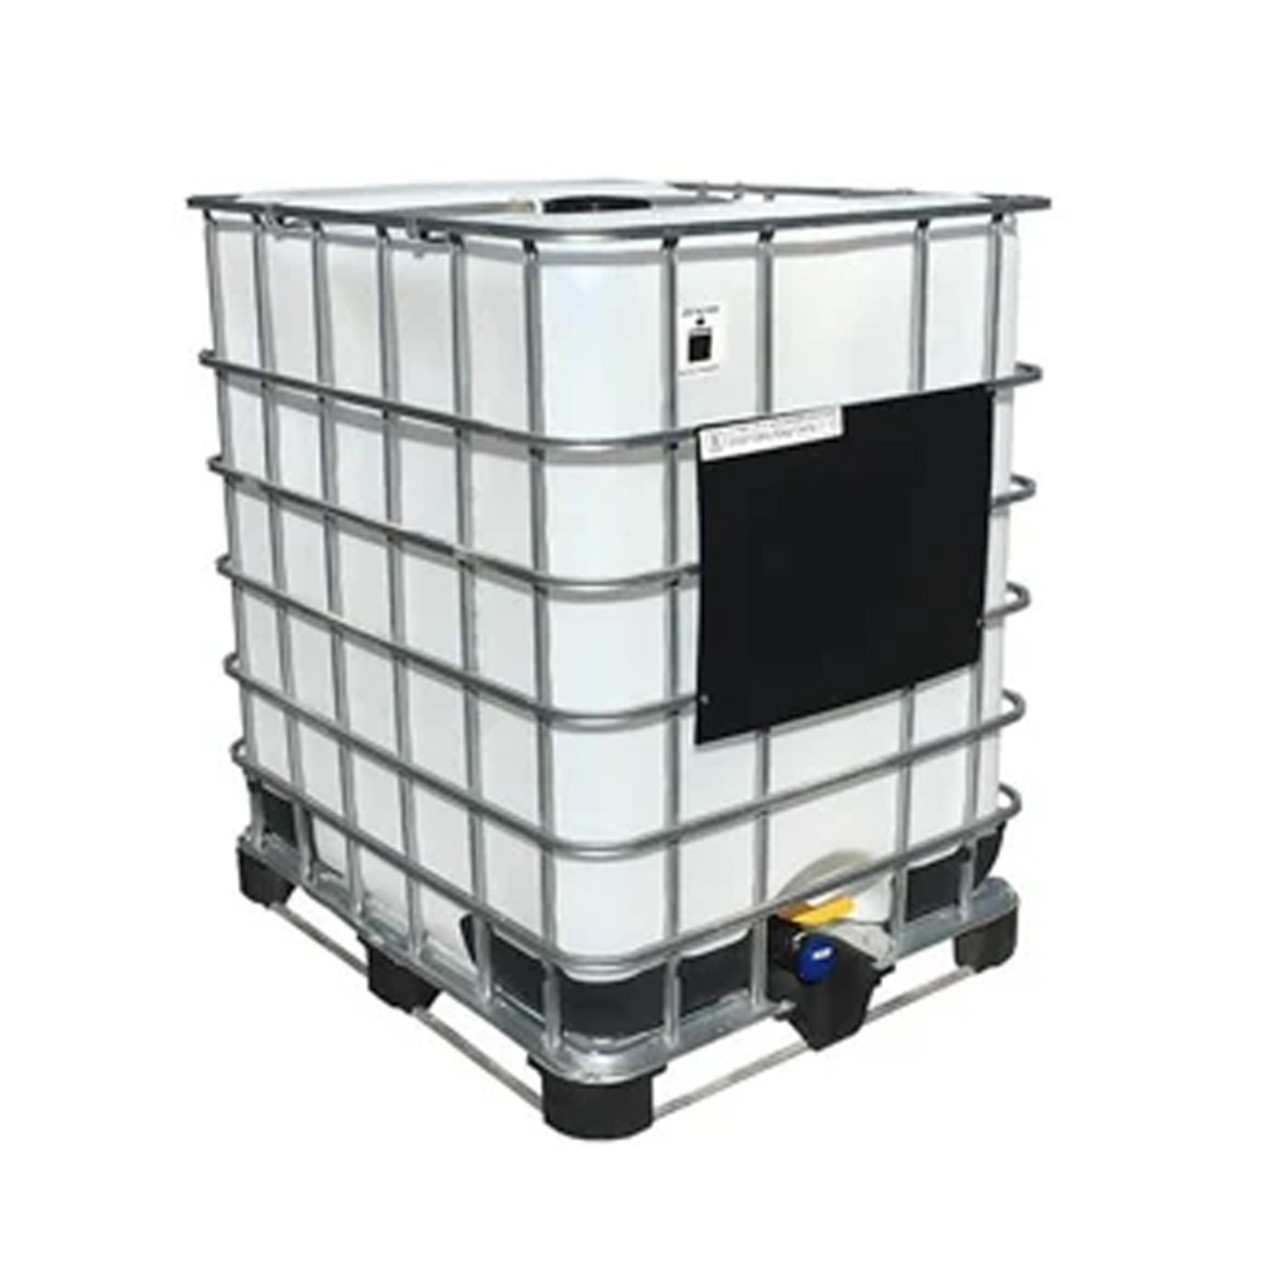 Image of an IBC Tote.